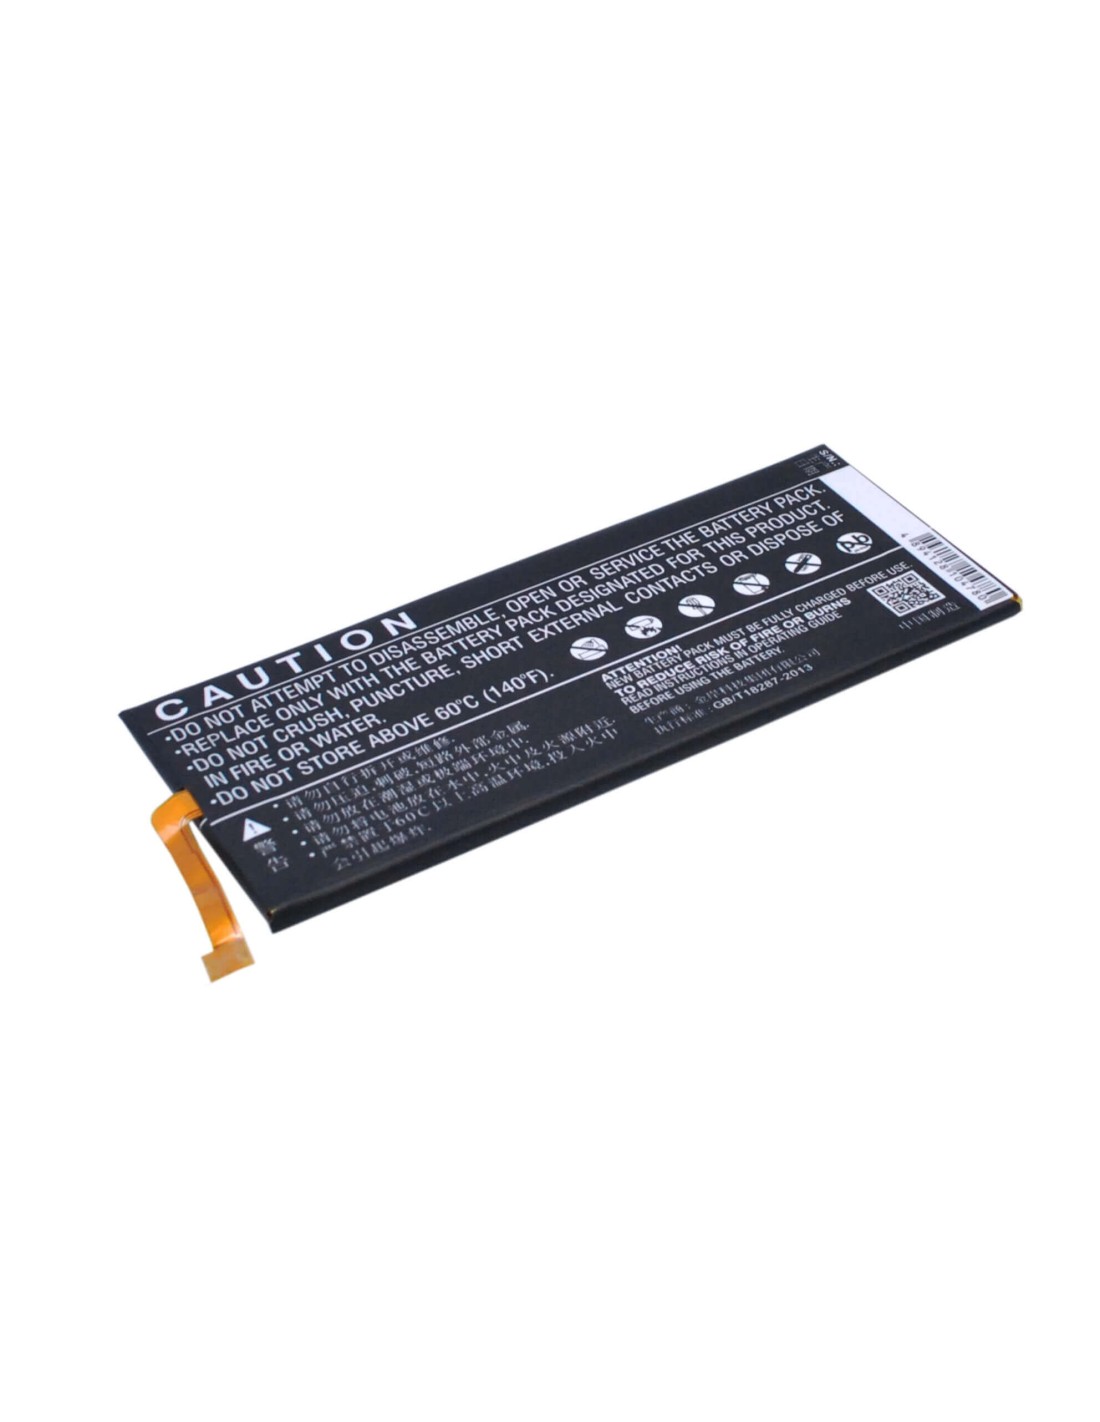 Battery for Huawei Ascend P8, P8, GRA-L09 3.8V, 2600mAh - 9.88Wh